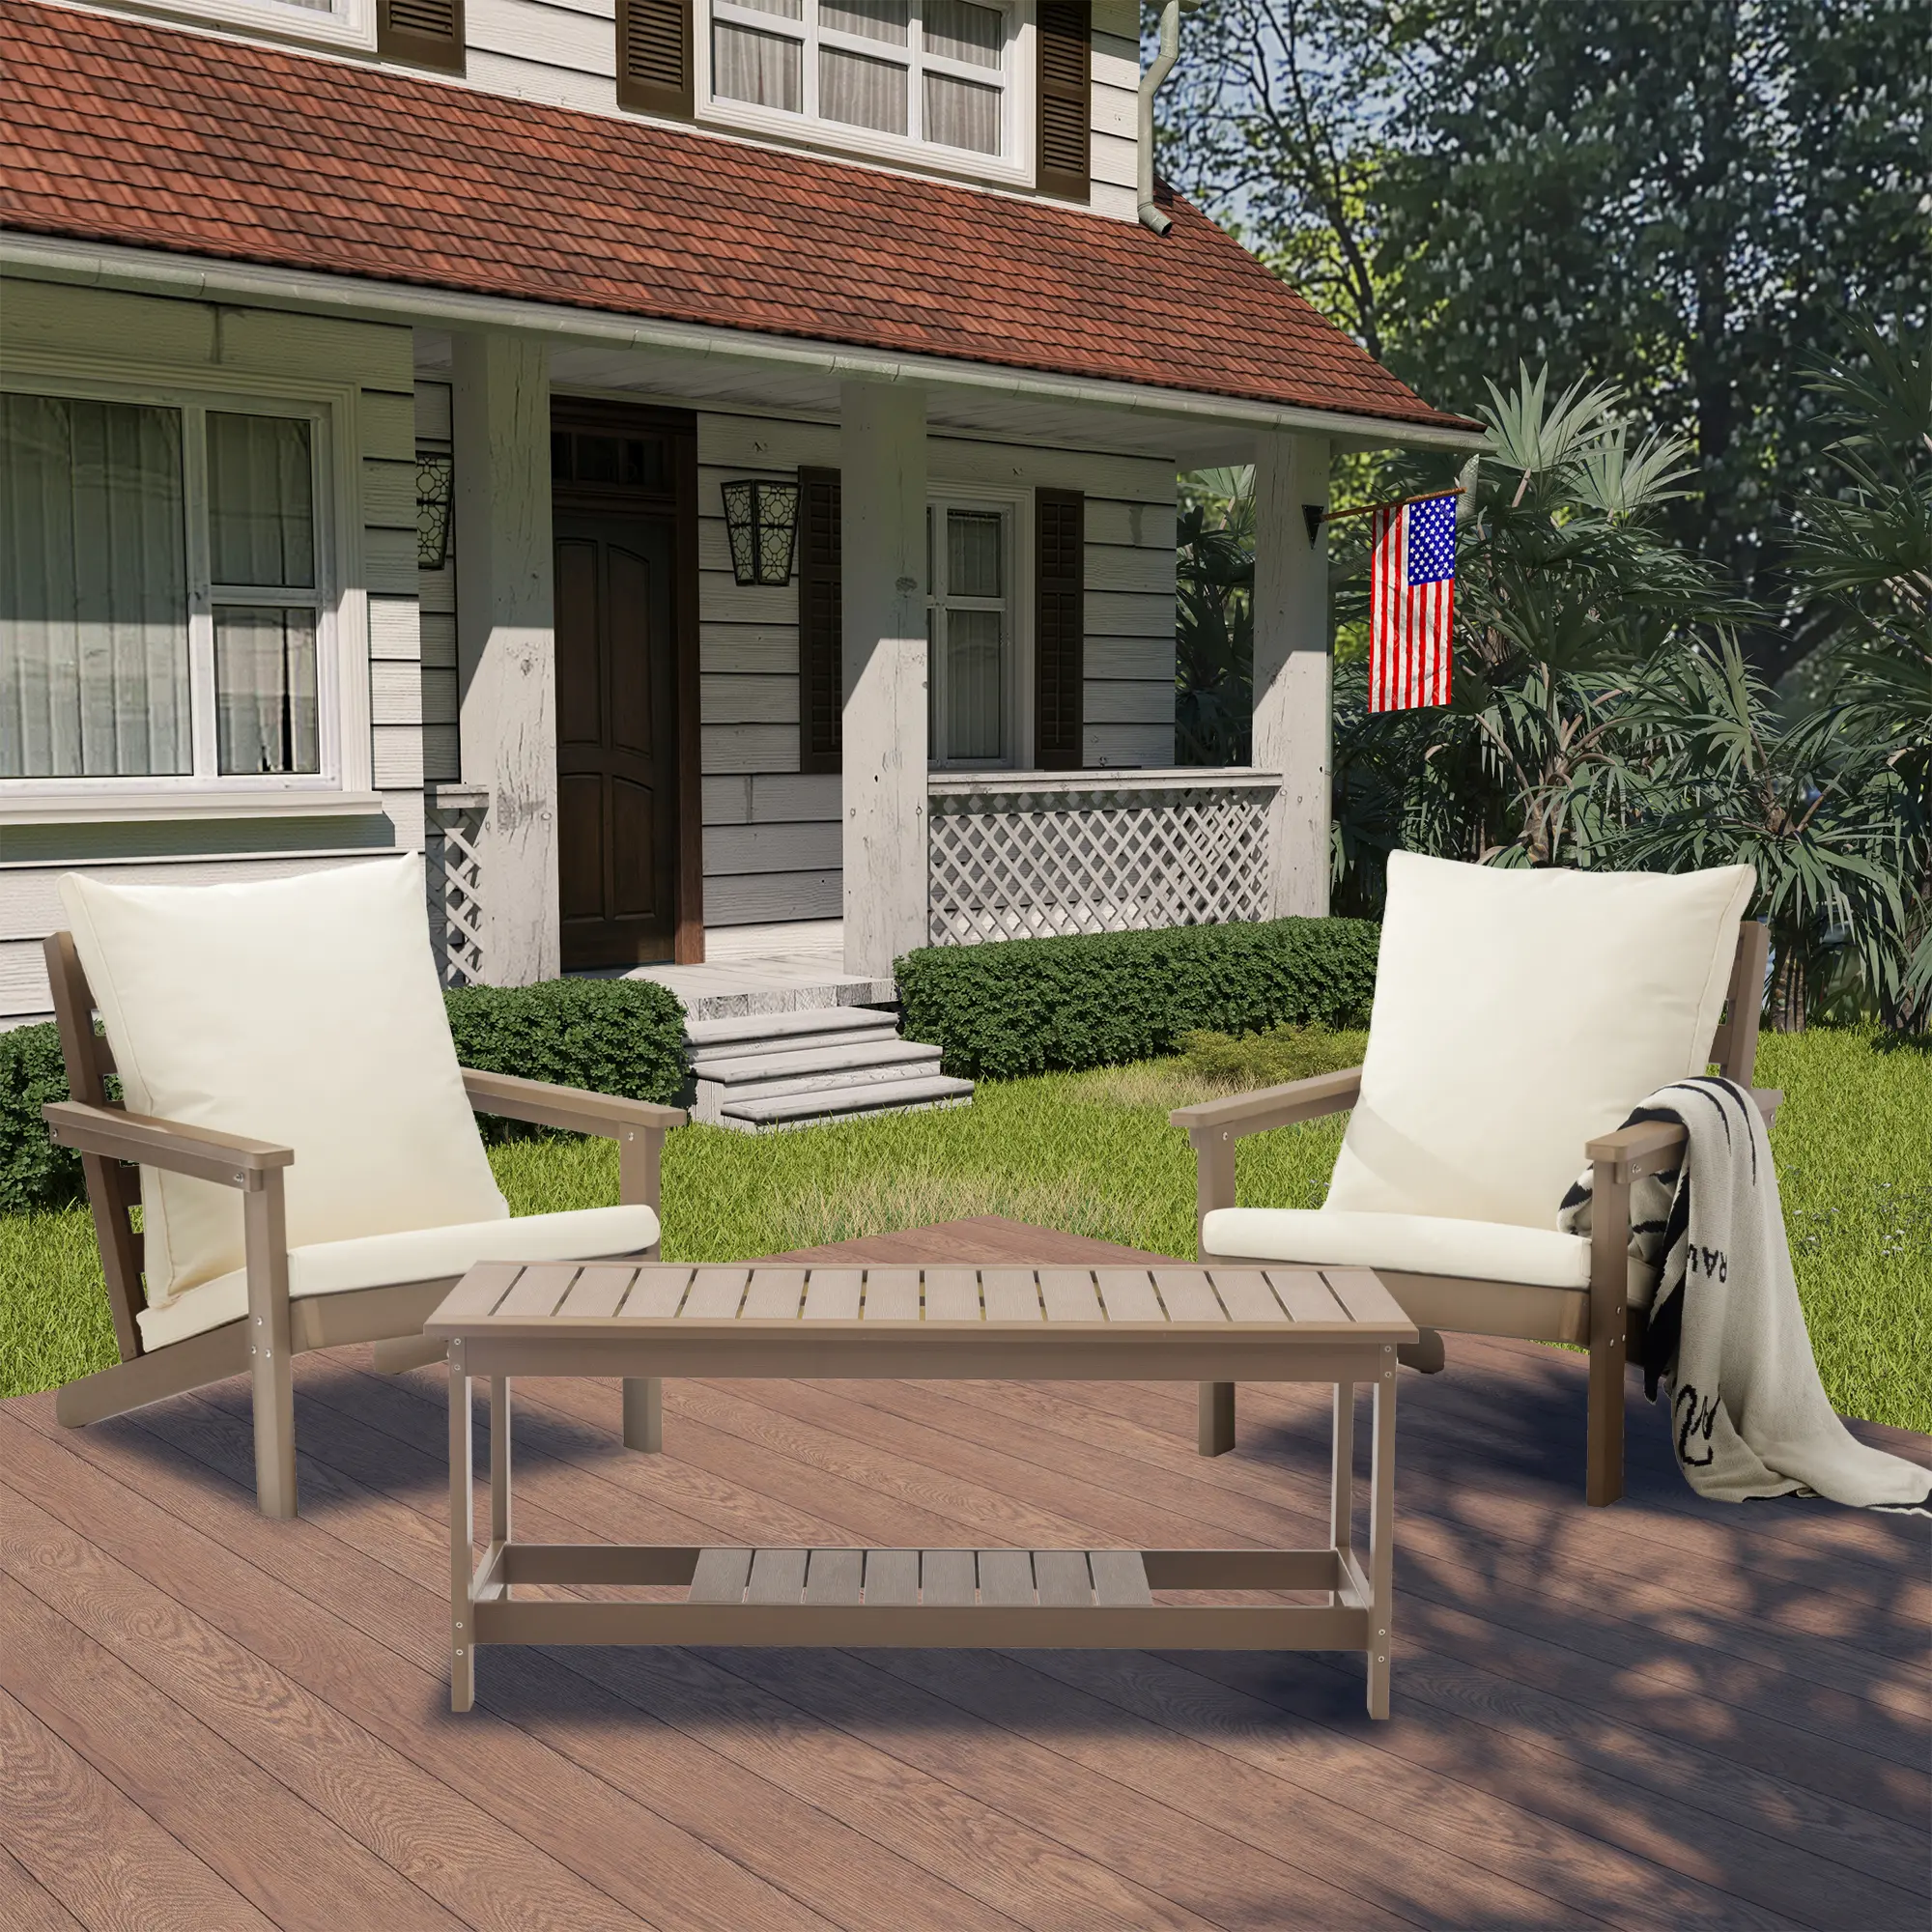 4-Piece Patio Furniture Set with Lounge Chairs and Table